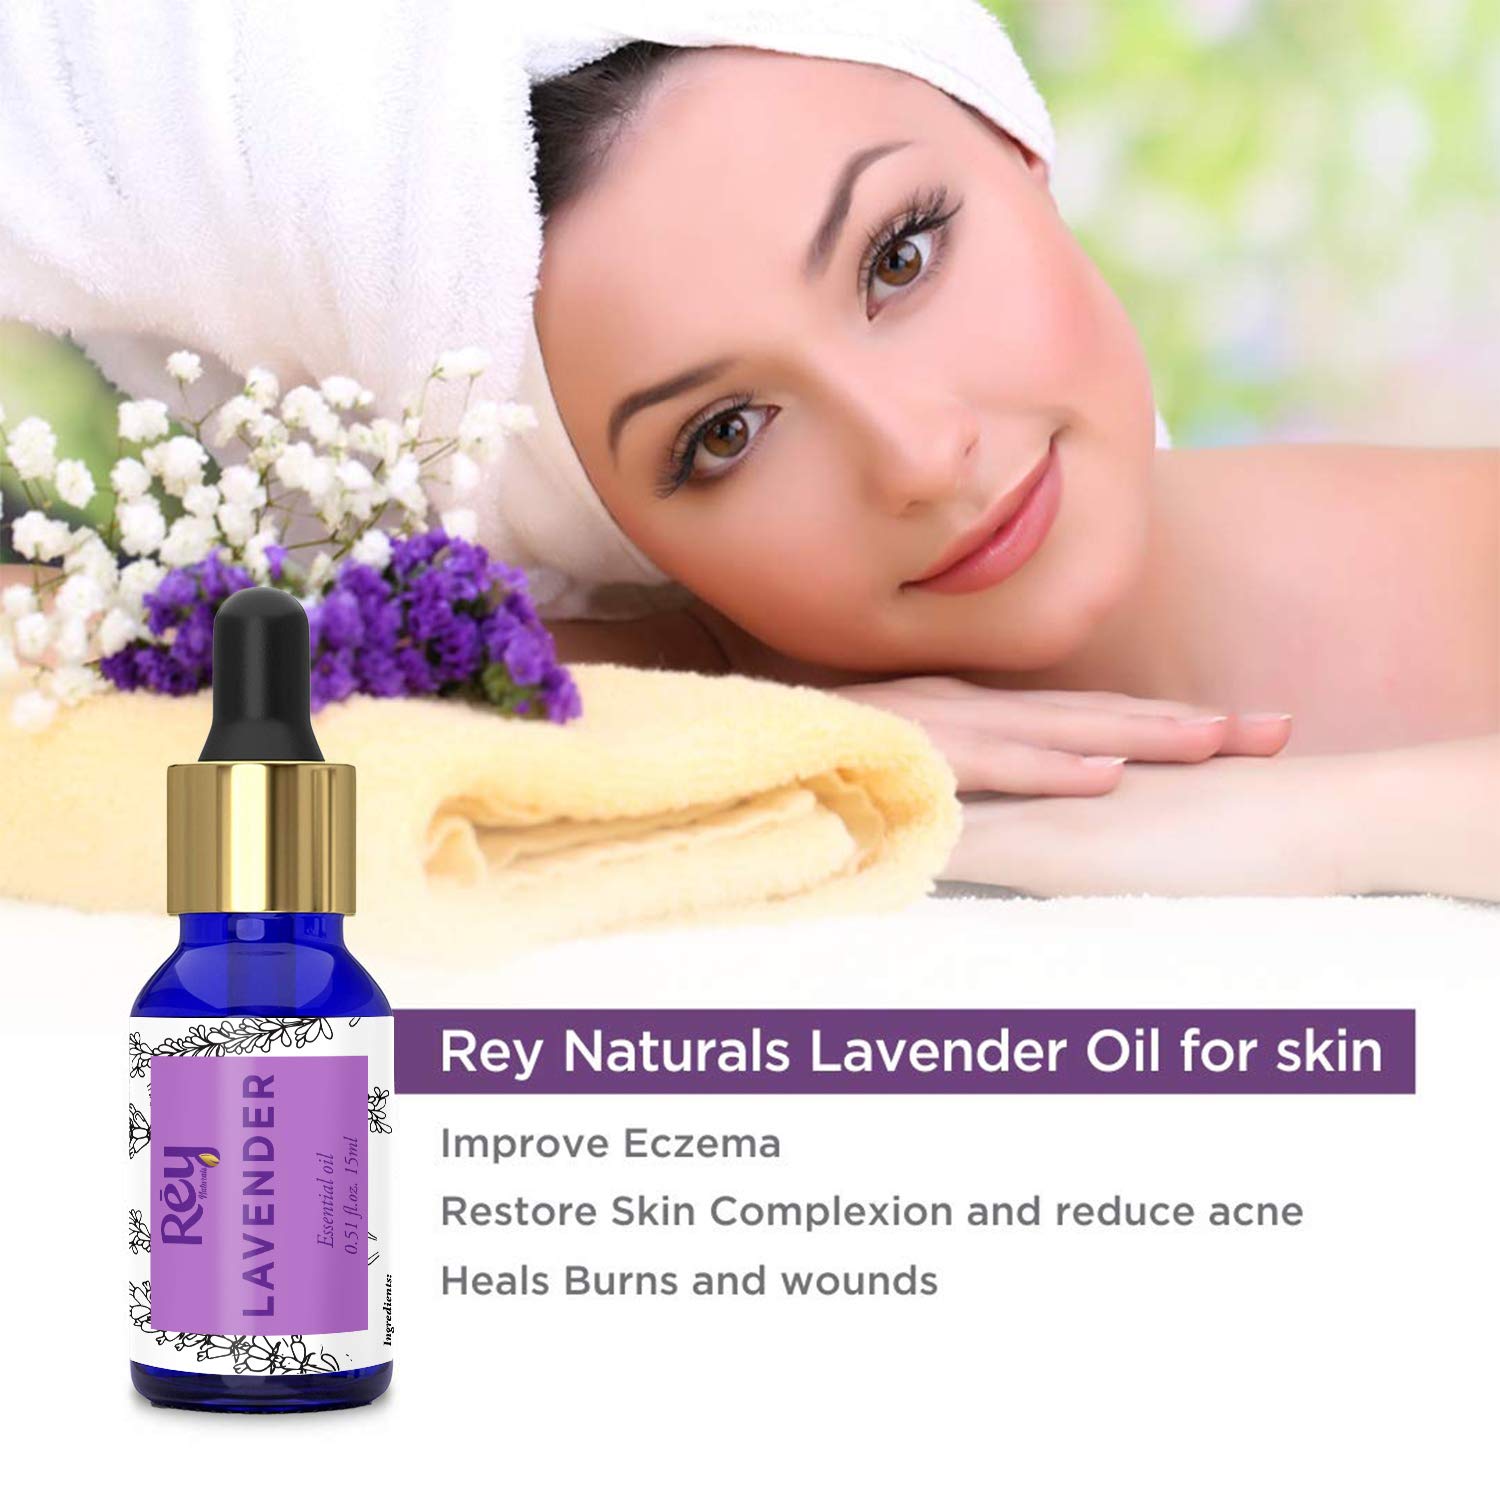 Rey Naturals Lavender Essential Oil - Calming, Healing & Nourishing - 100% Pure, Natural Lavender Oil - For Hair, Skin & Aromatherapy - 15ml